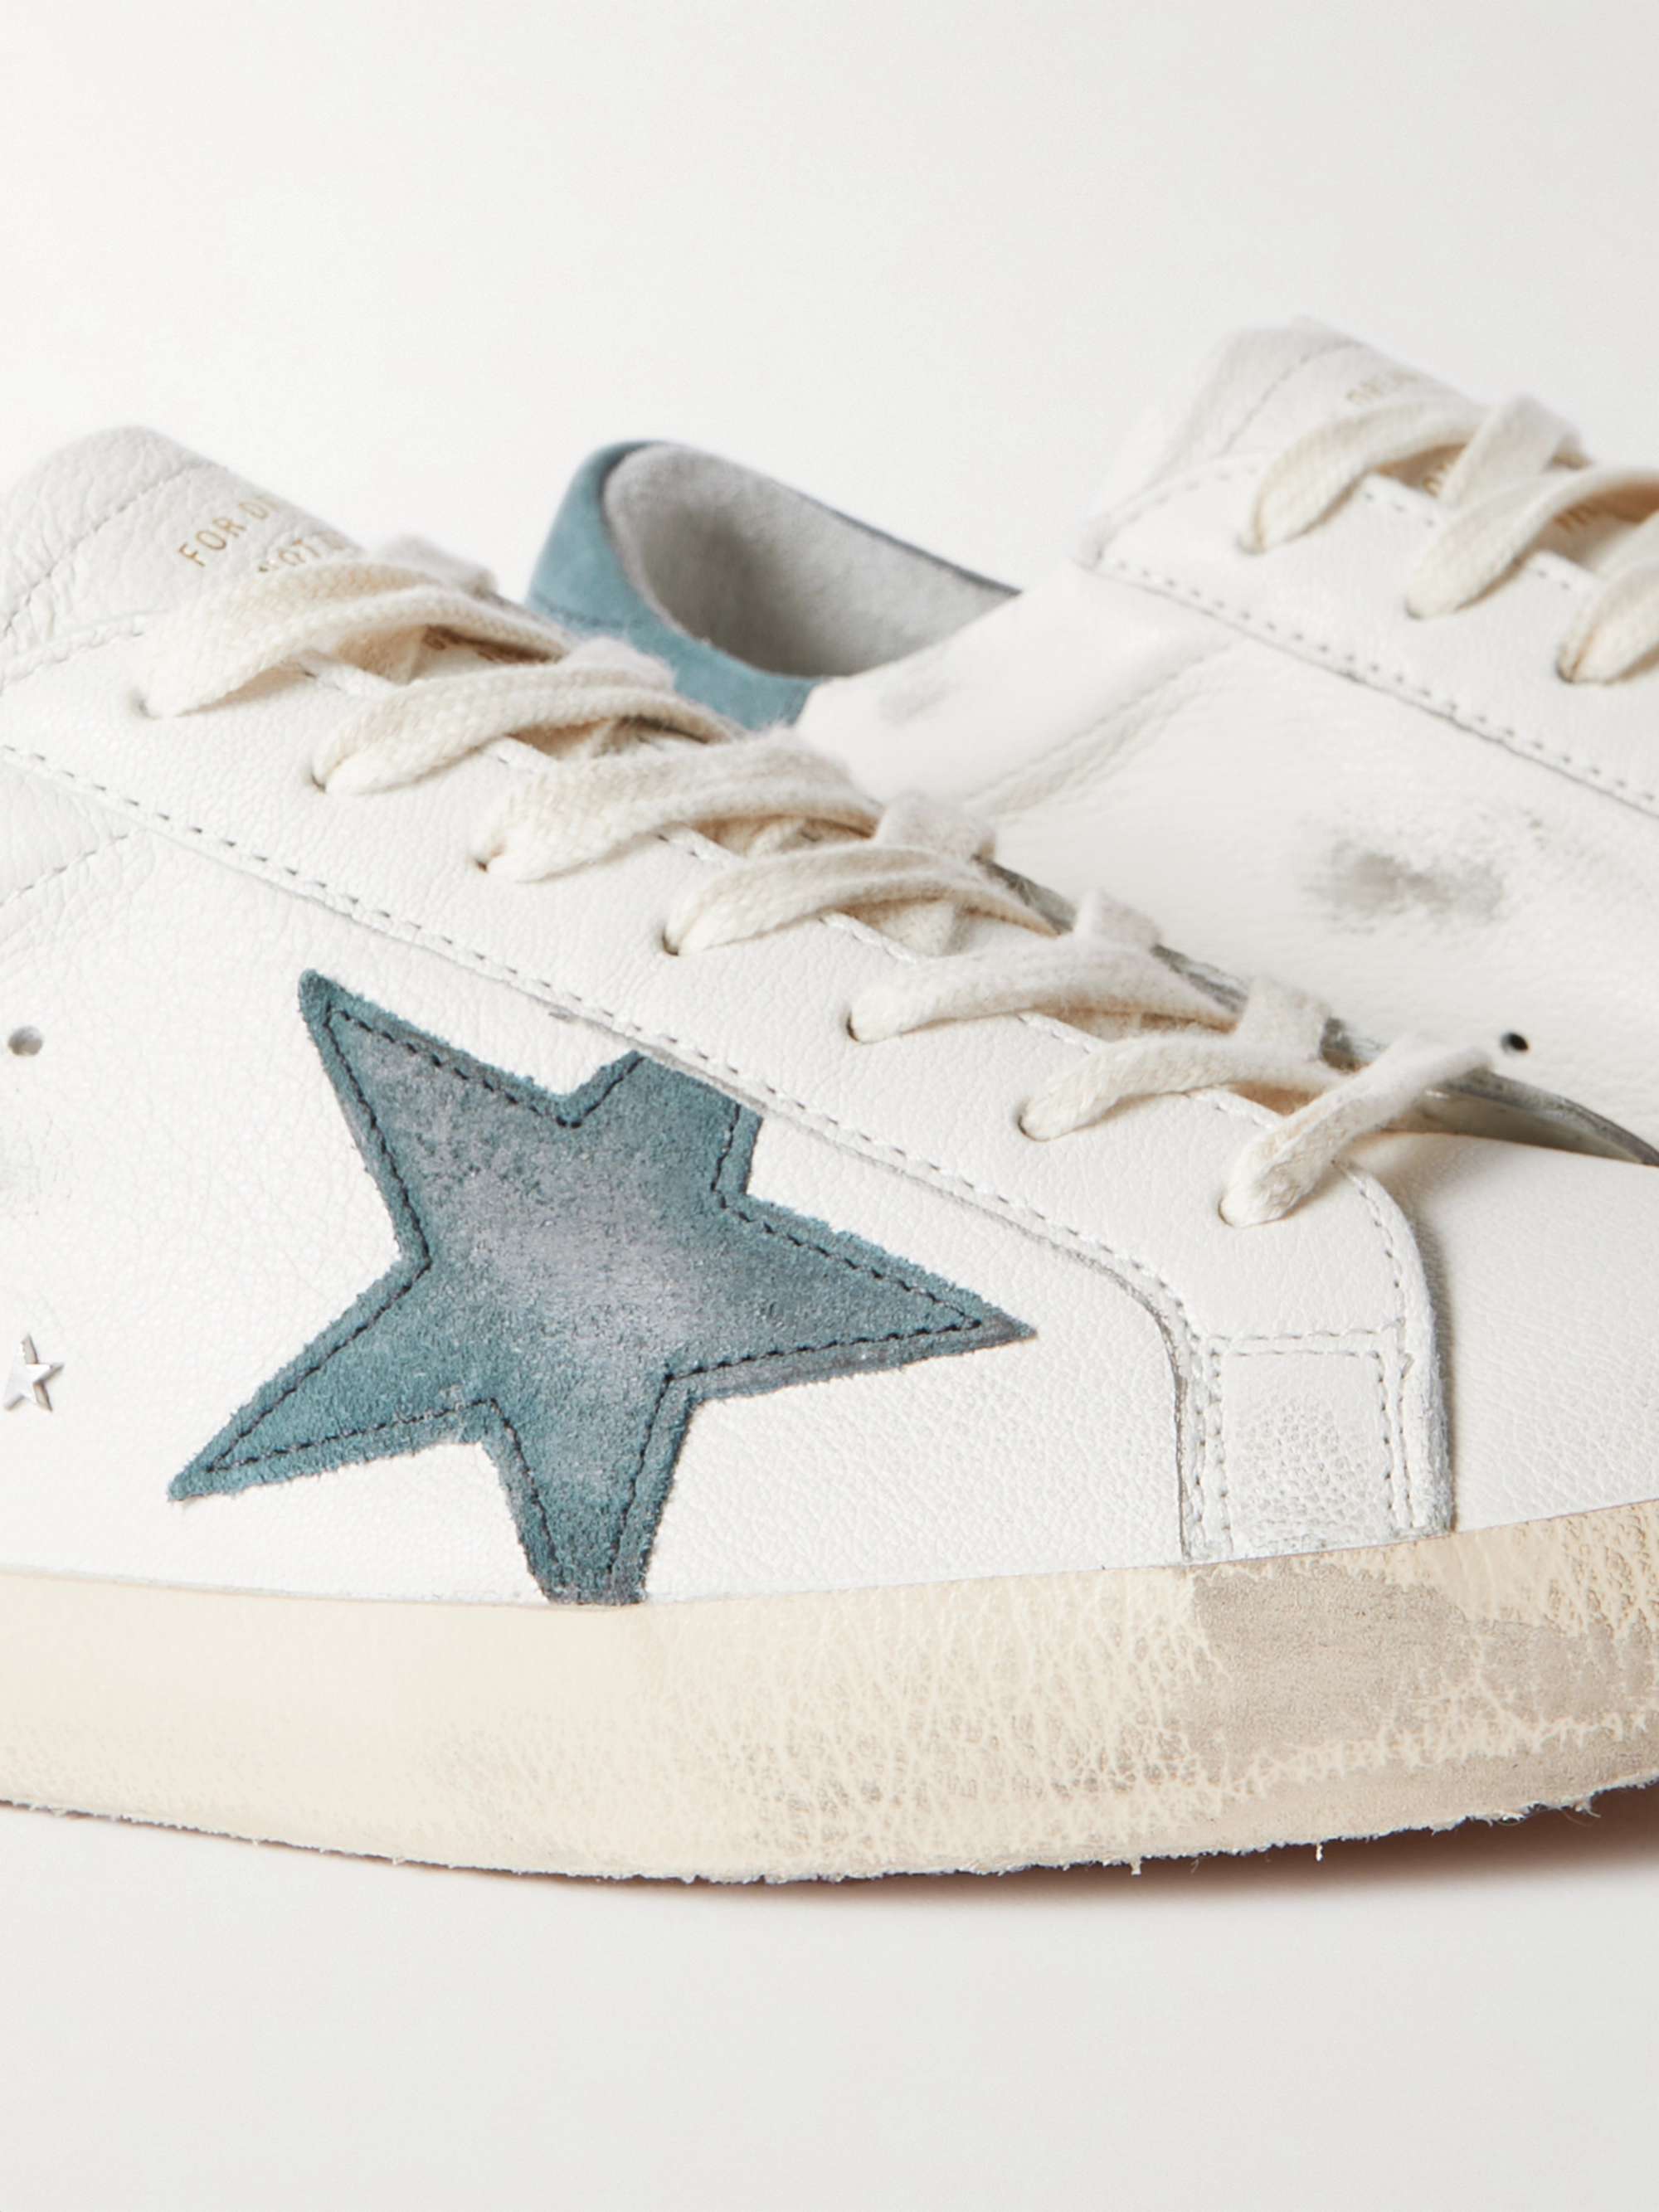 GOLDEN GOOSE Superstar Distressed Suede-Trimmed Full-Grain Leather Sneakers